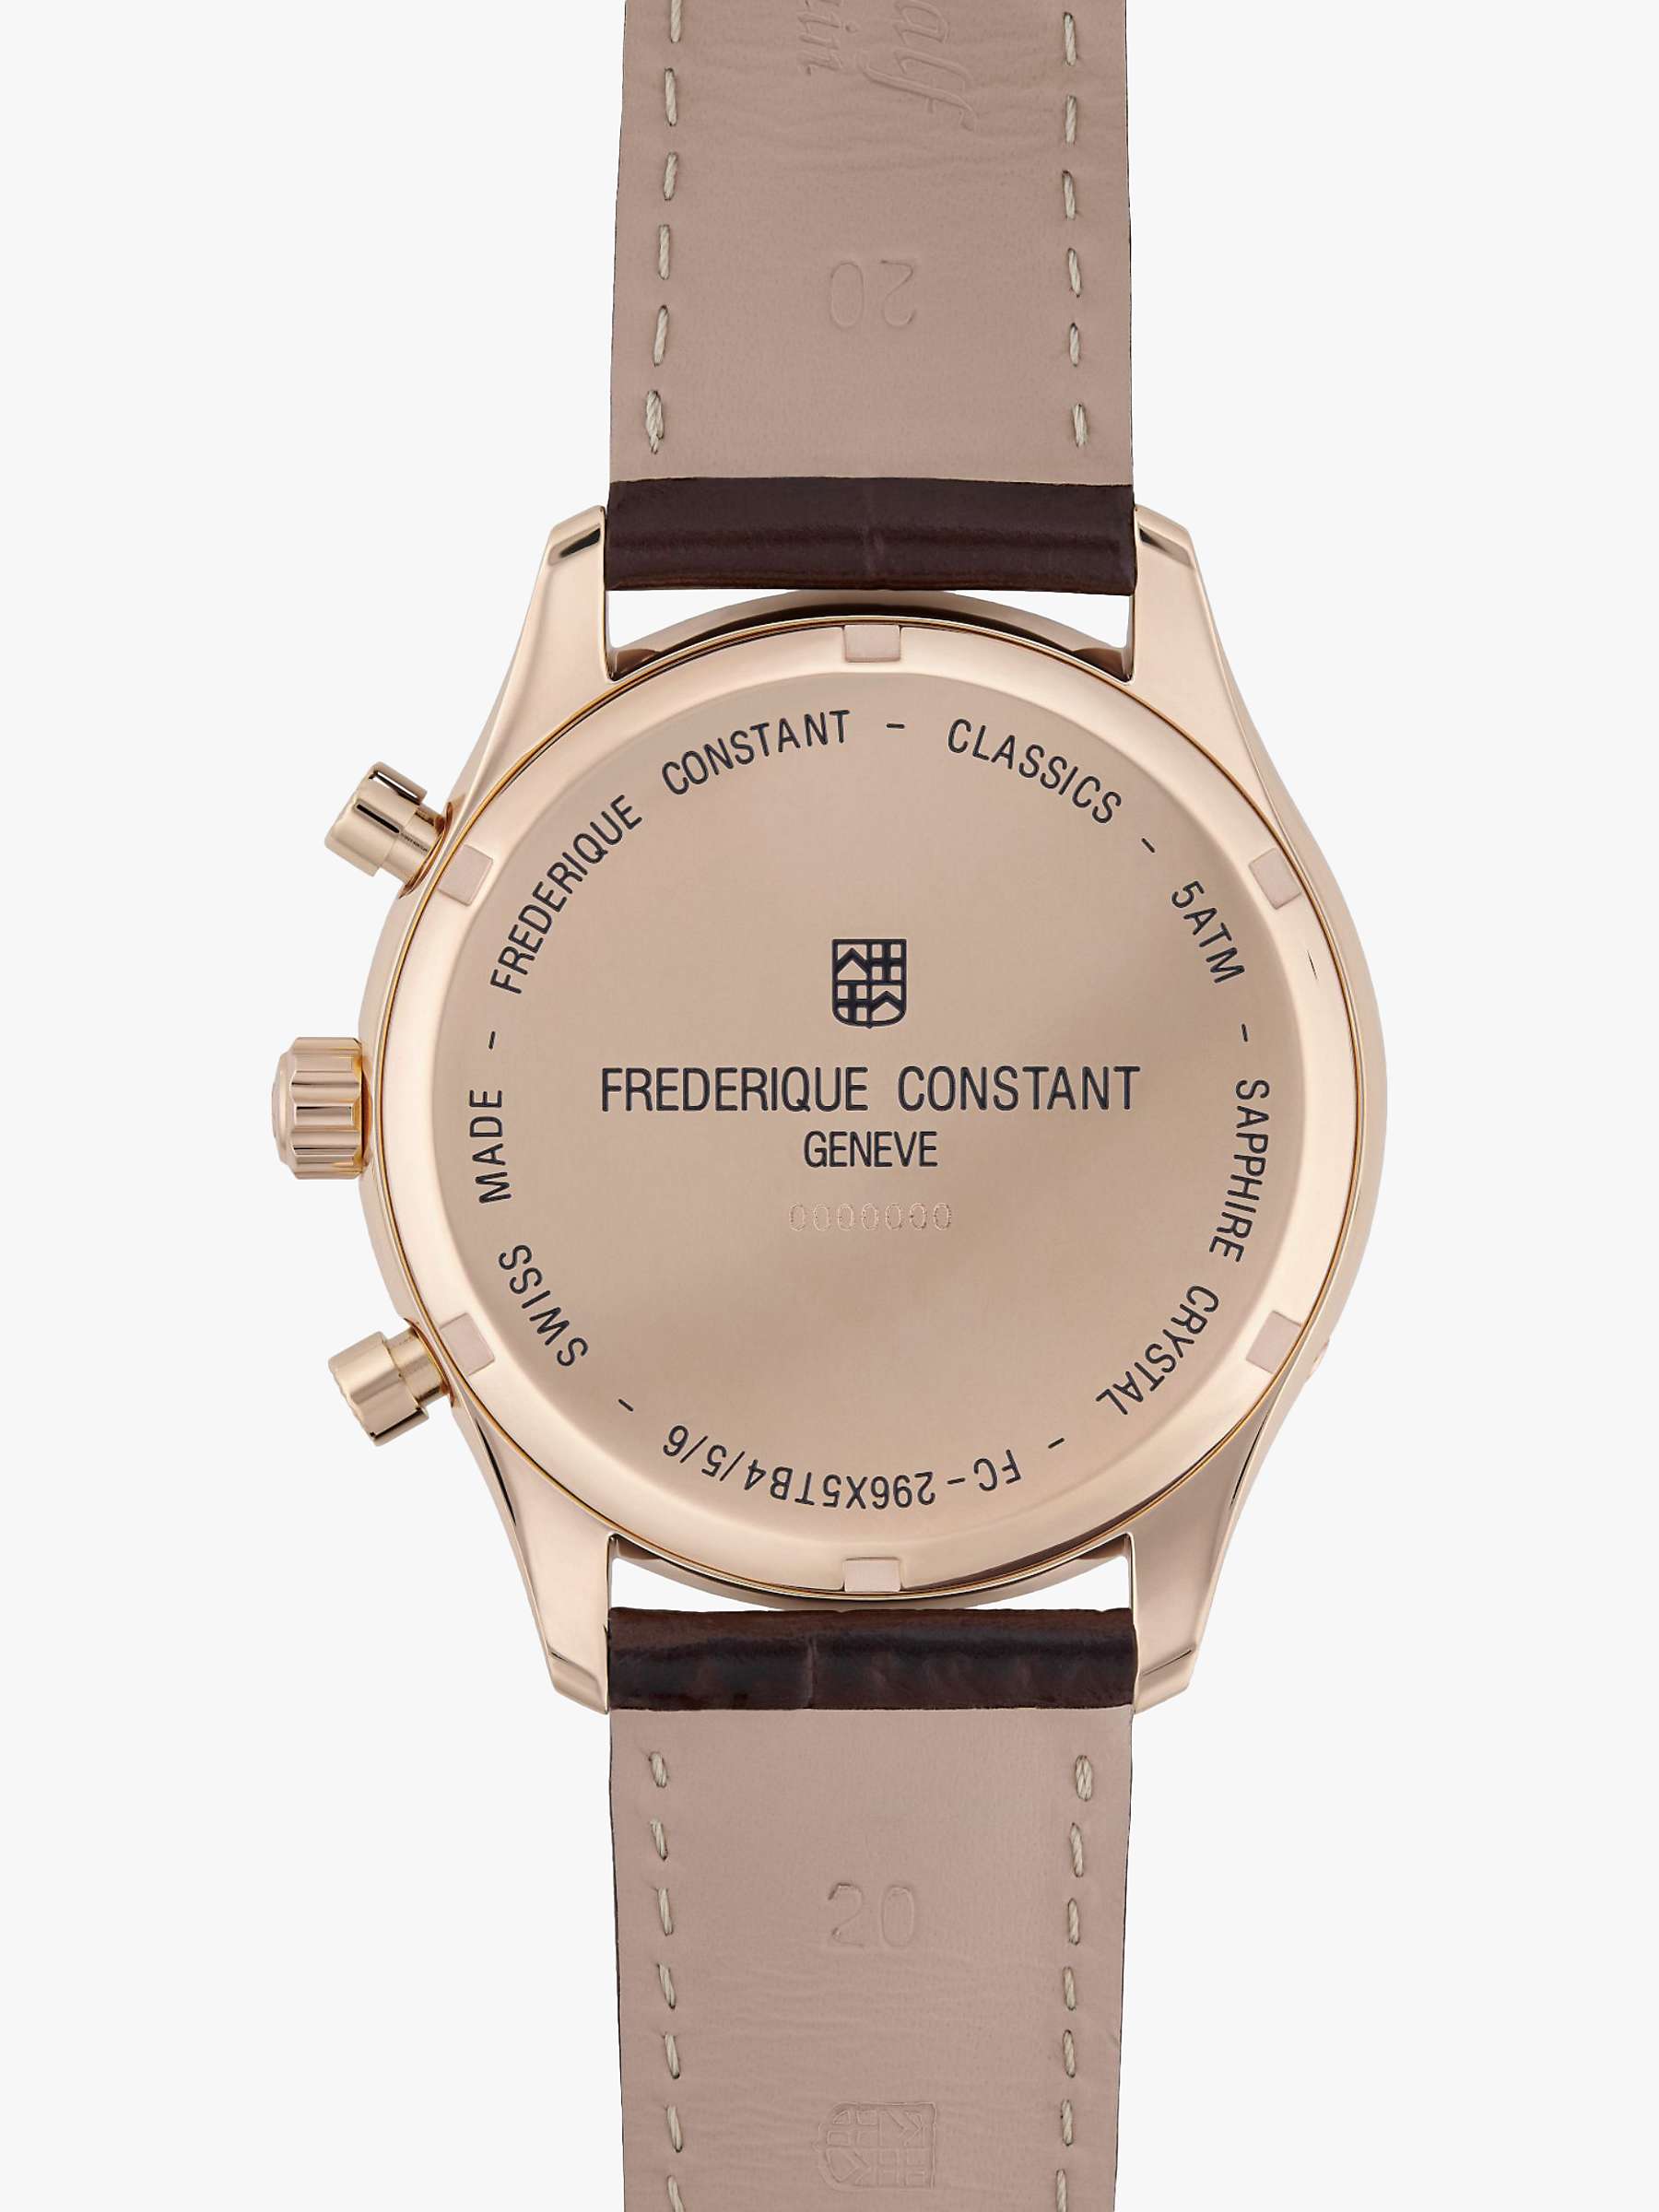 Buy Frederique Constant FC-296SW5B4 Men's Classic Chronograph Leather Strap Watch, Brown/White Online at johnlewis.com